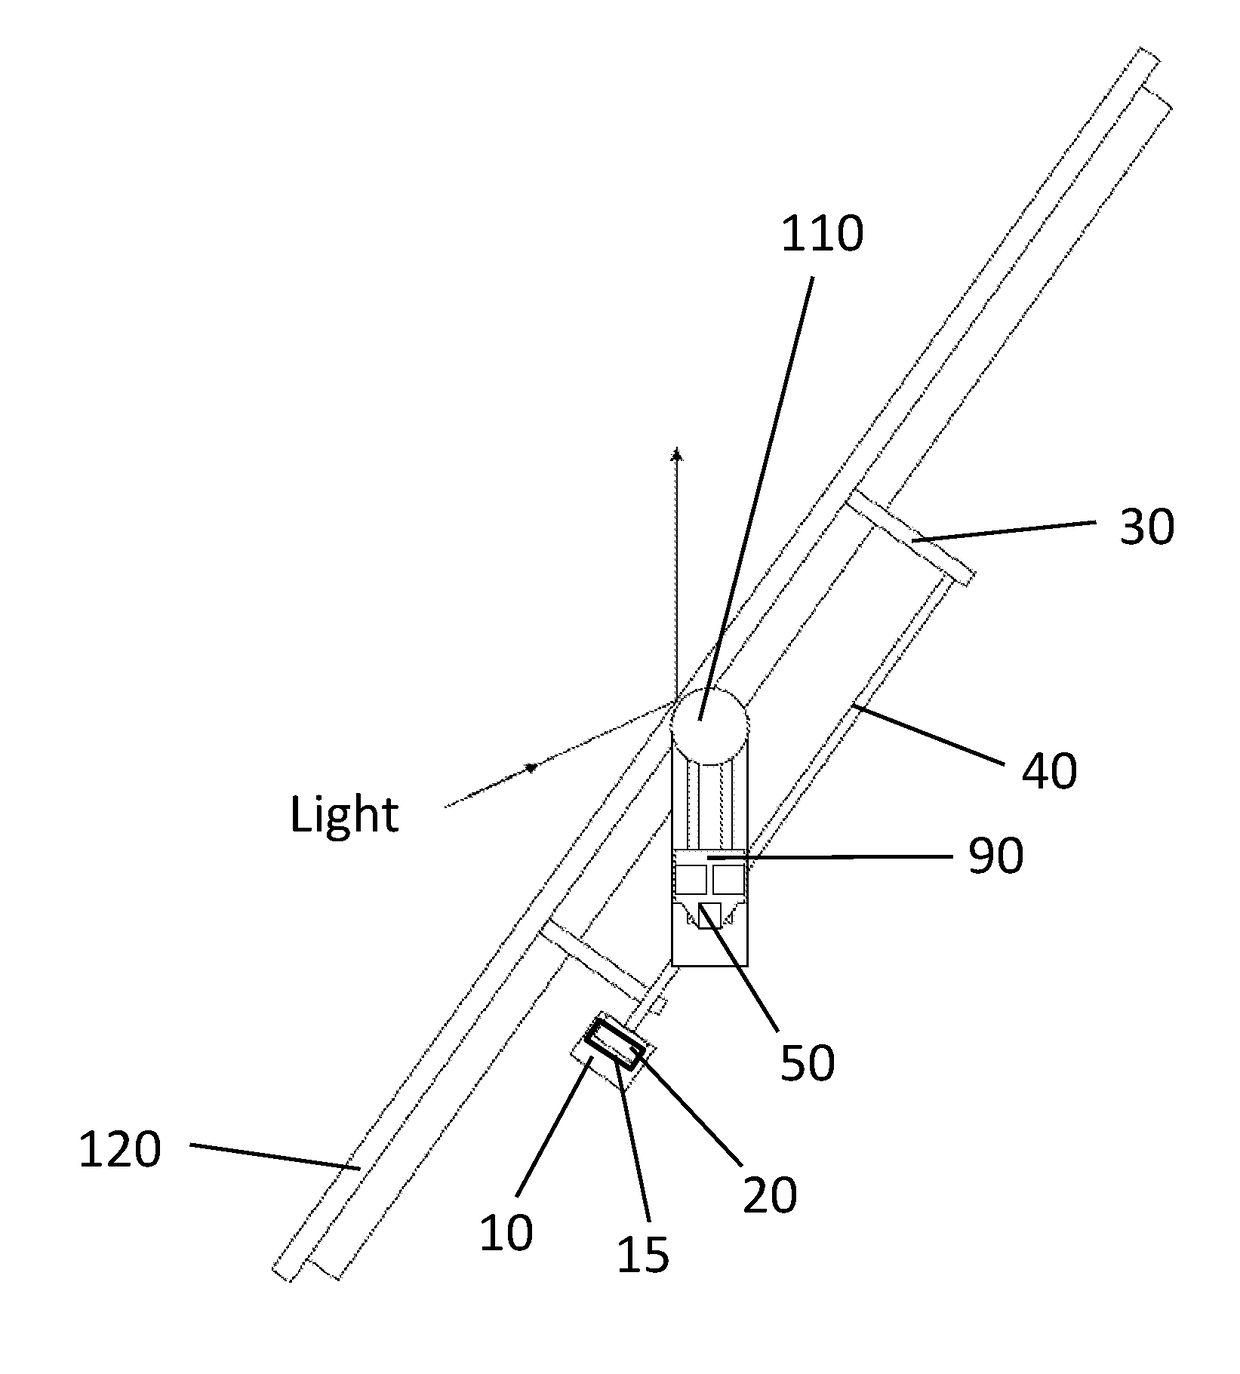 Movement control apparatus for heliostat device